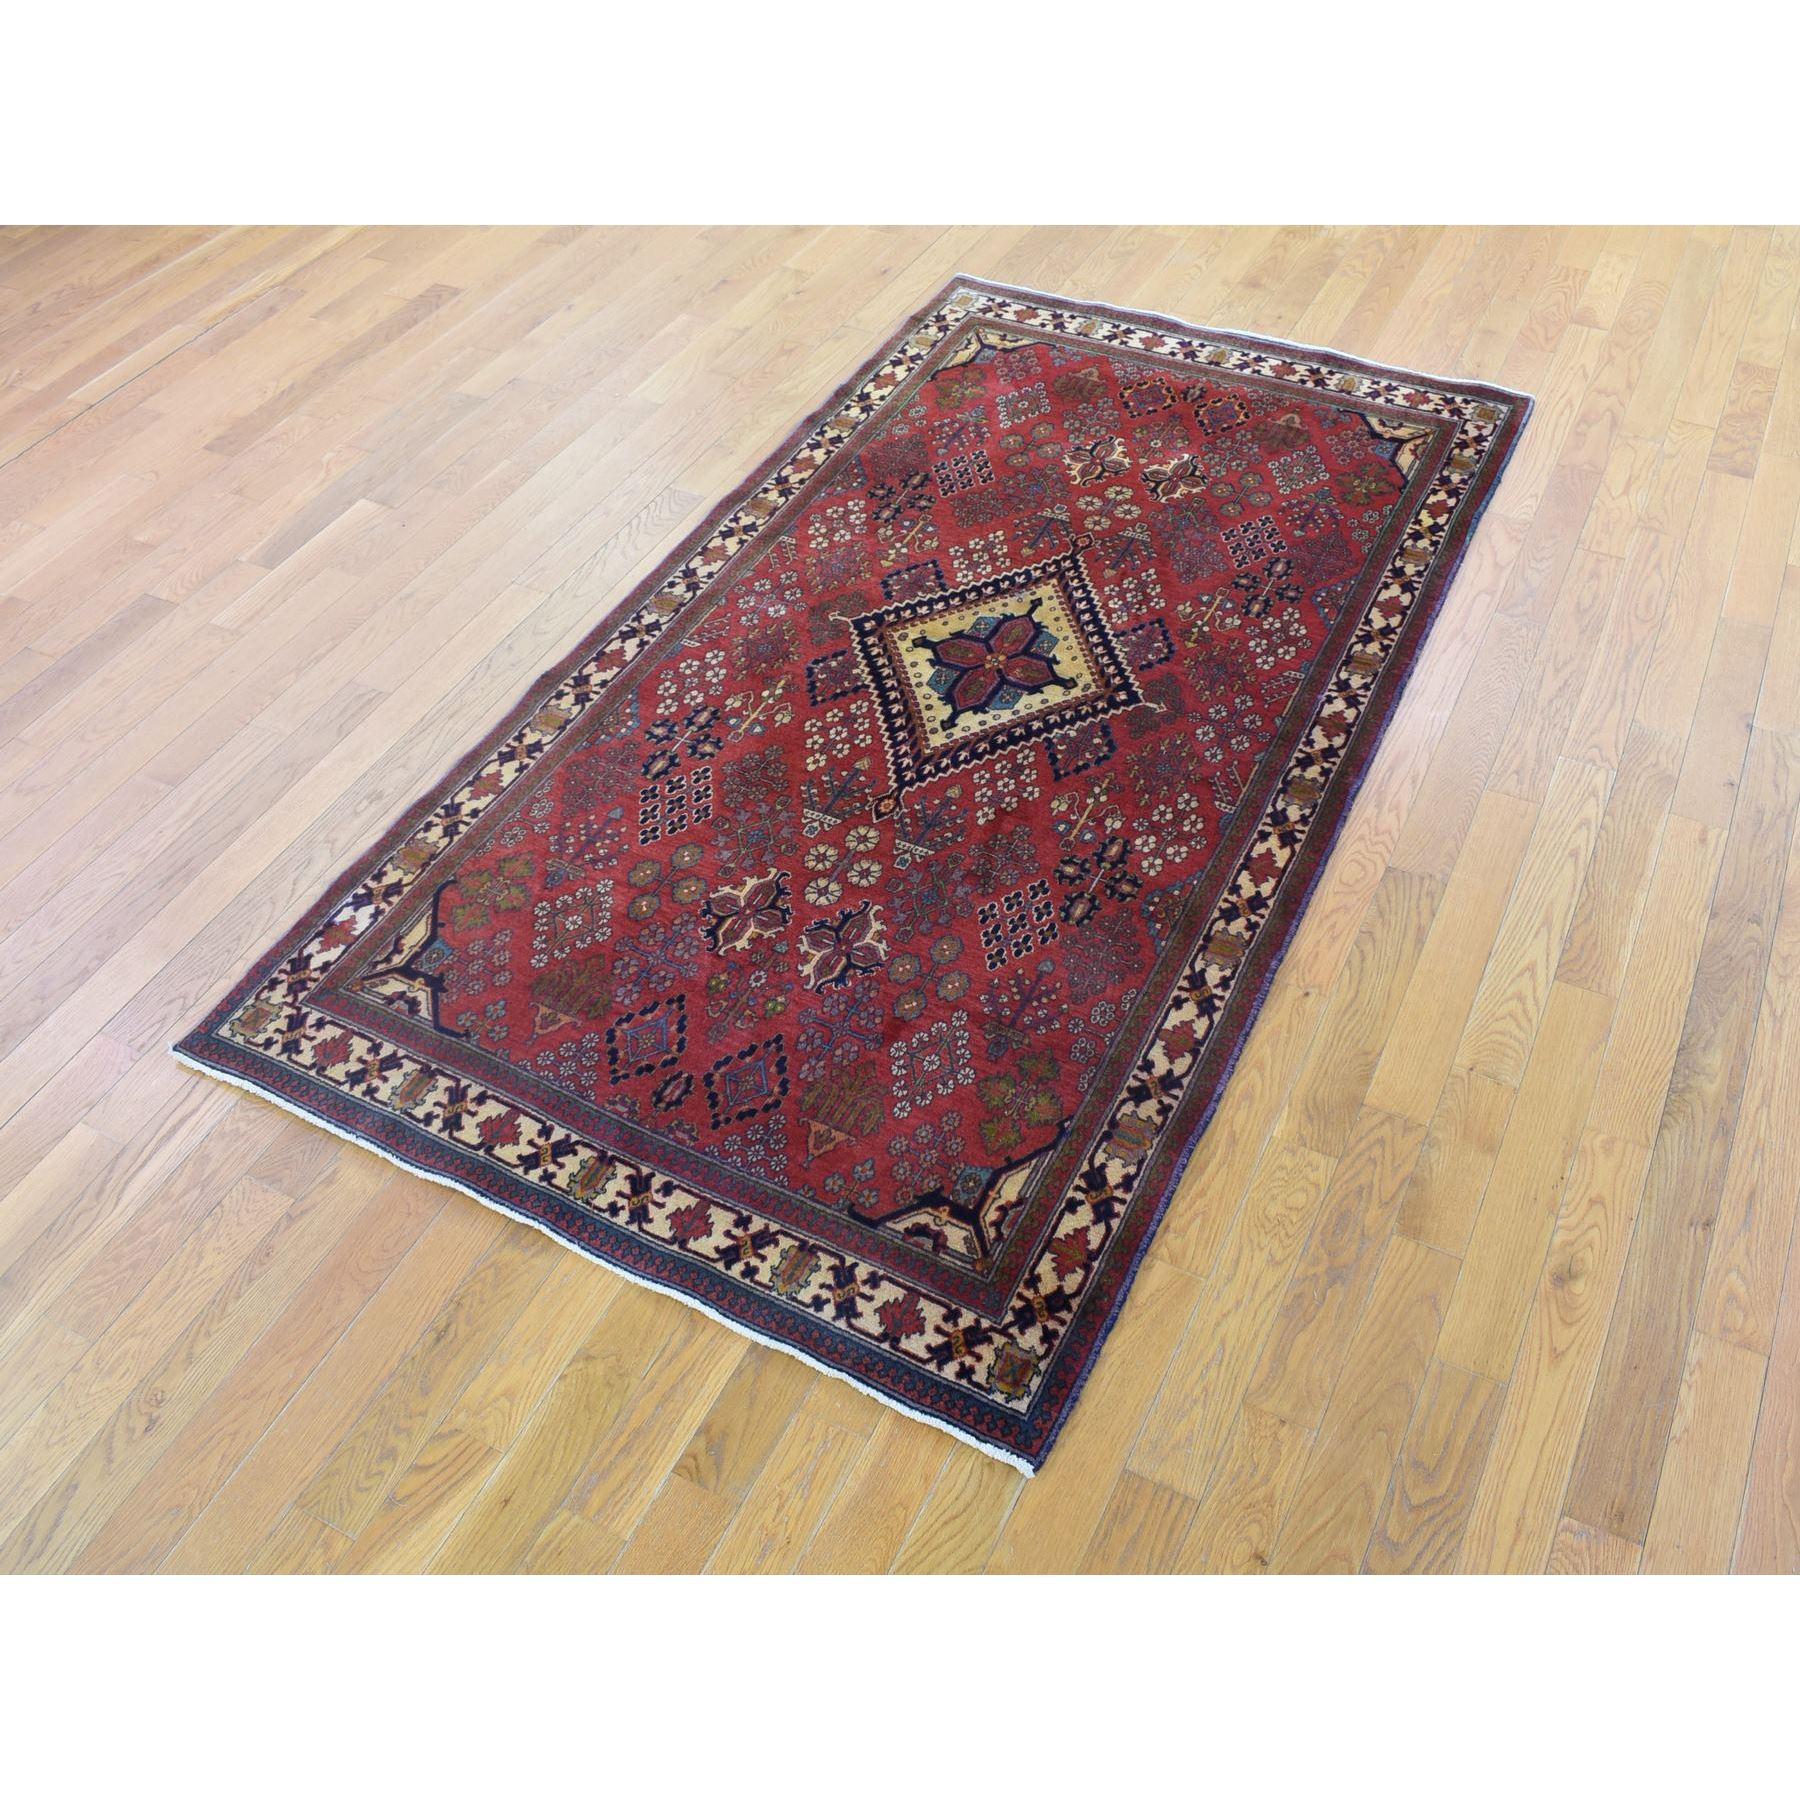 This fabulous hand-knotted carpet has been created and designed for extra strength and durability. This rug has been handcrafted for weeks in the traditional method that is used to make
Exact Rug Size in Feet and Inches : 4'x7'7